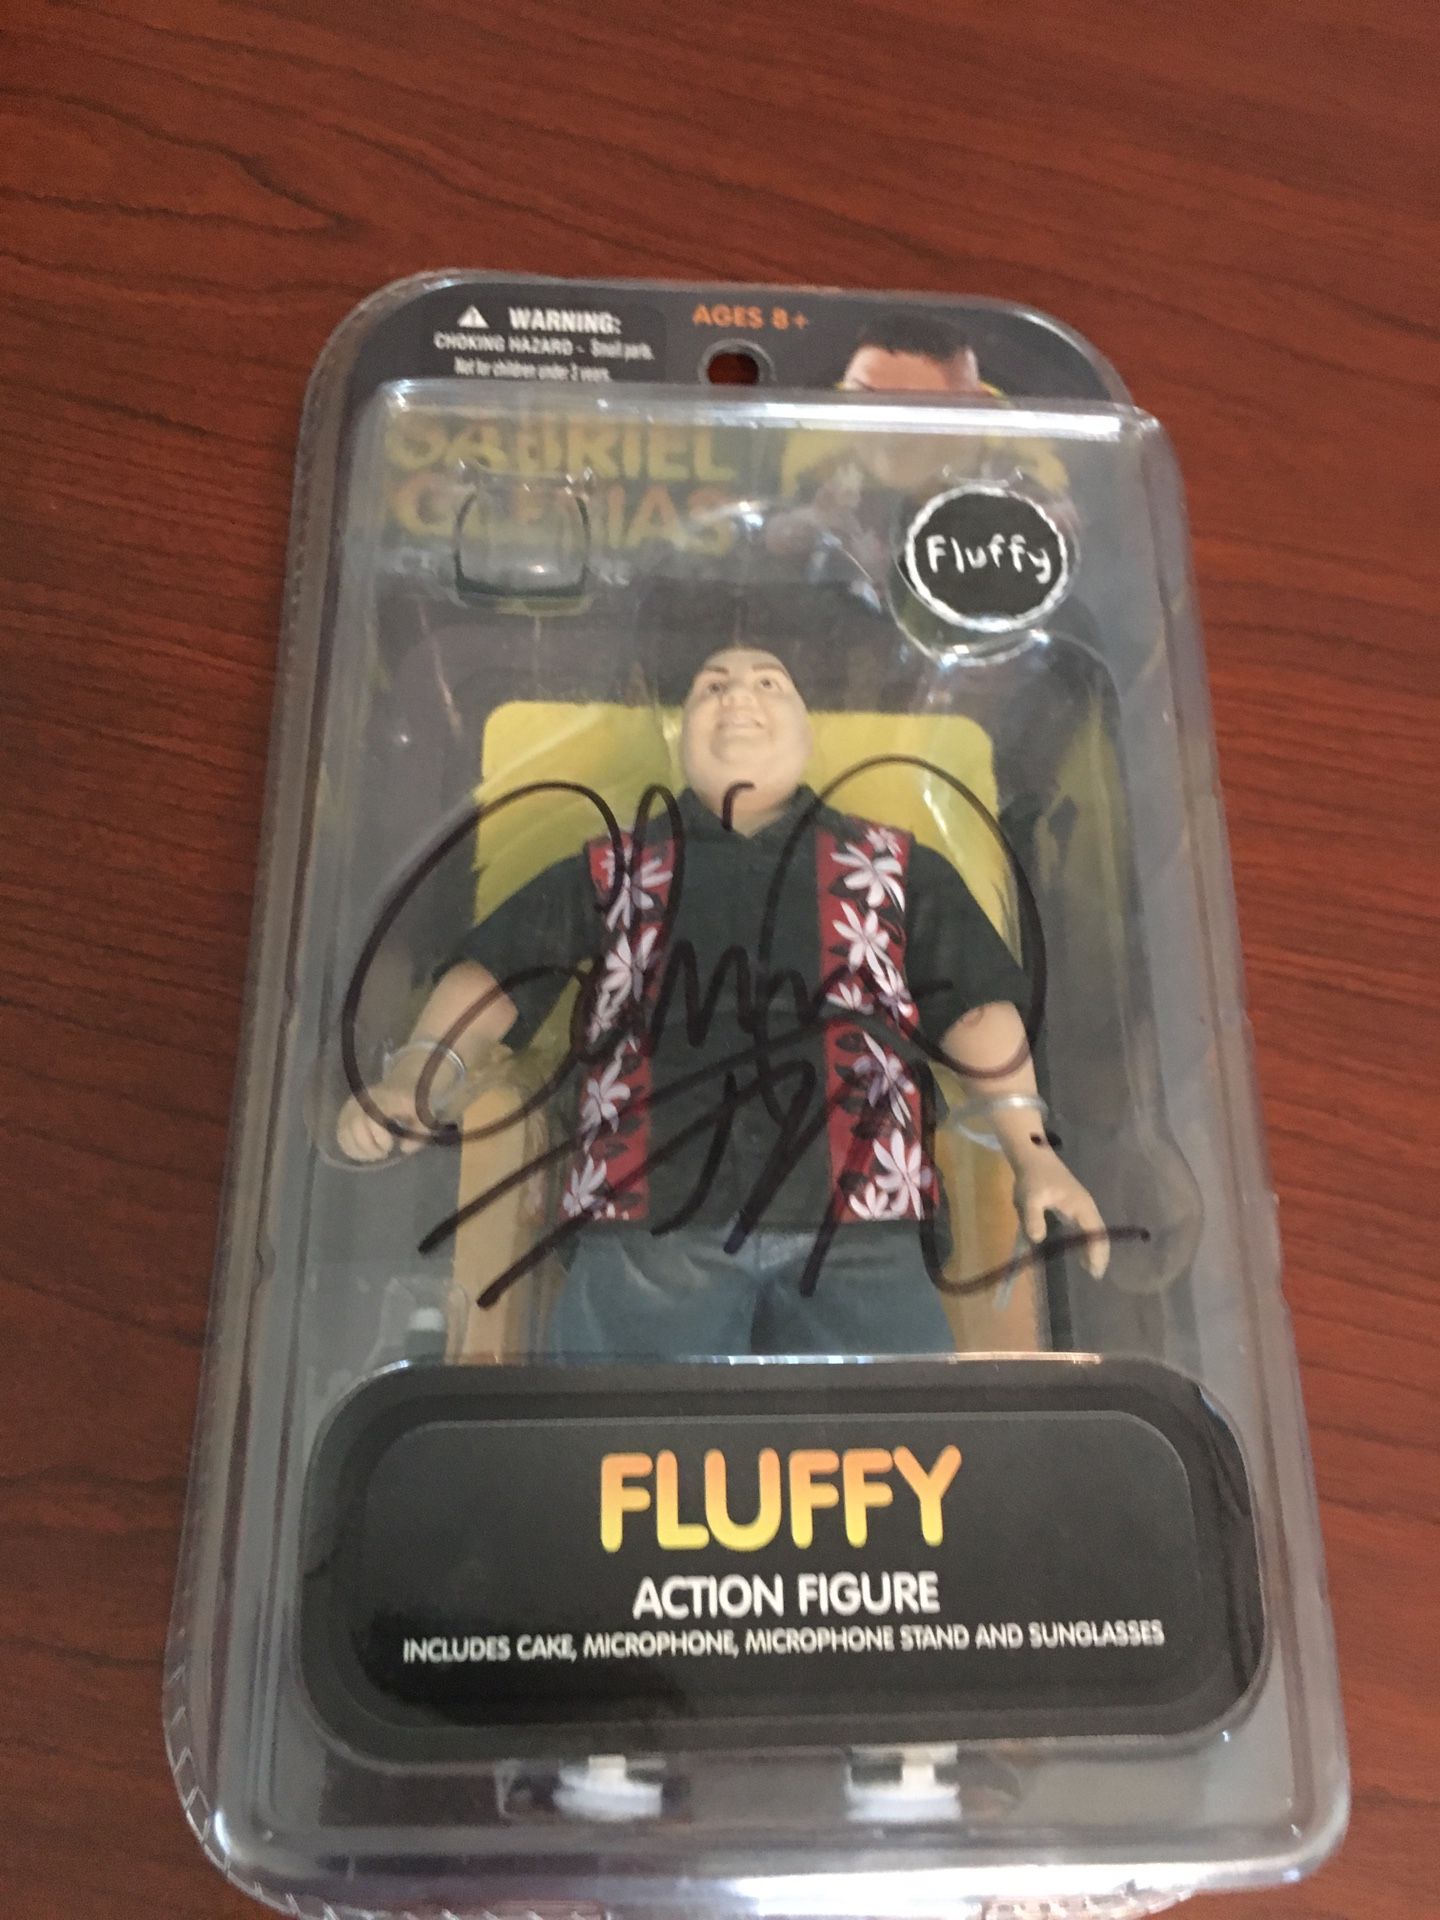 Gabriel Iglesias “Fluffy” Signed Autographed Action Figure